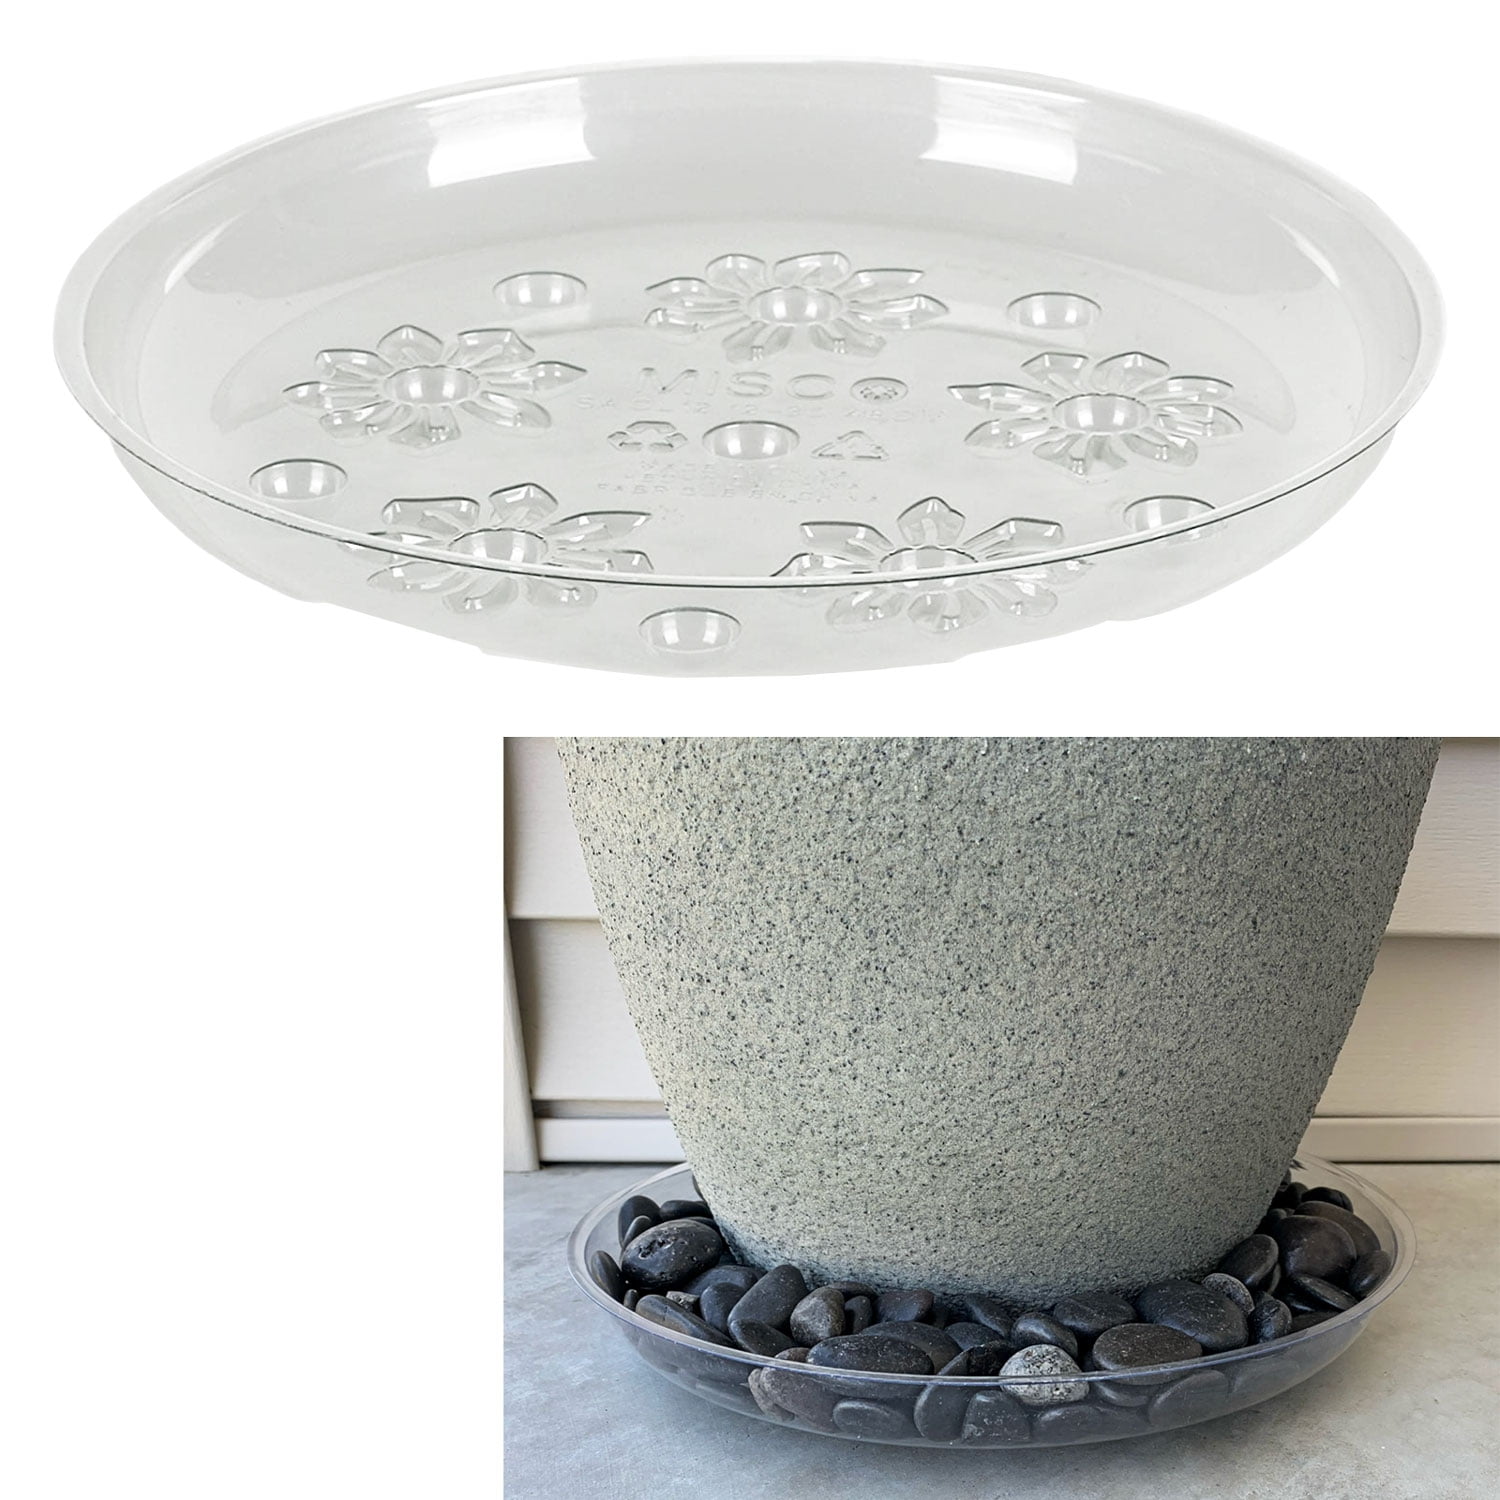 Details about   Round Strong Plastic Plant Pot Saucer Base Water Drip Tray Multi-sizes P0W0 